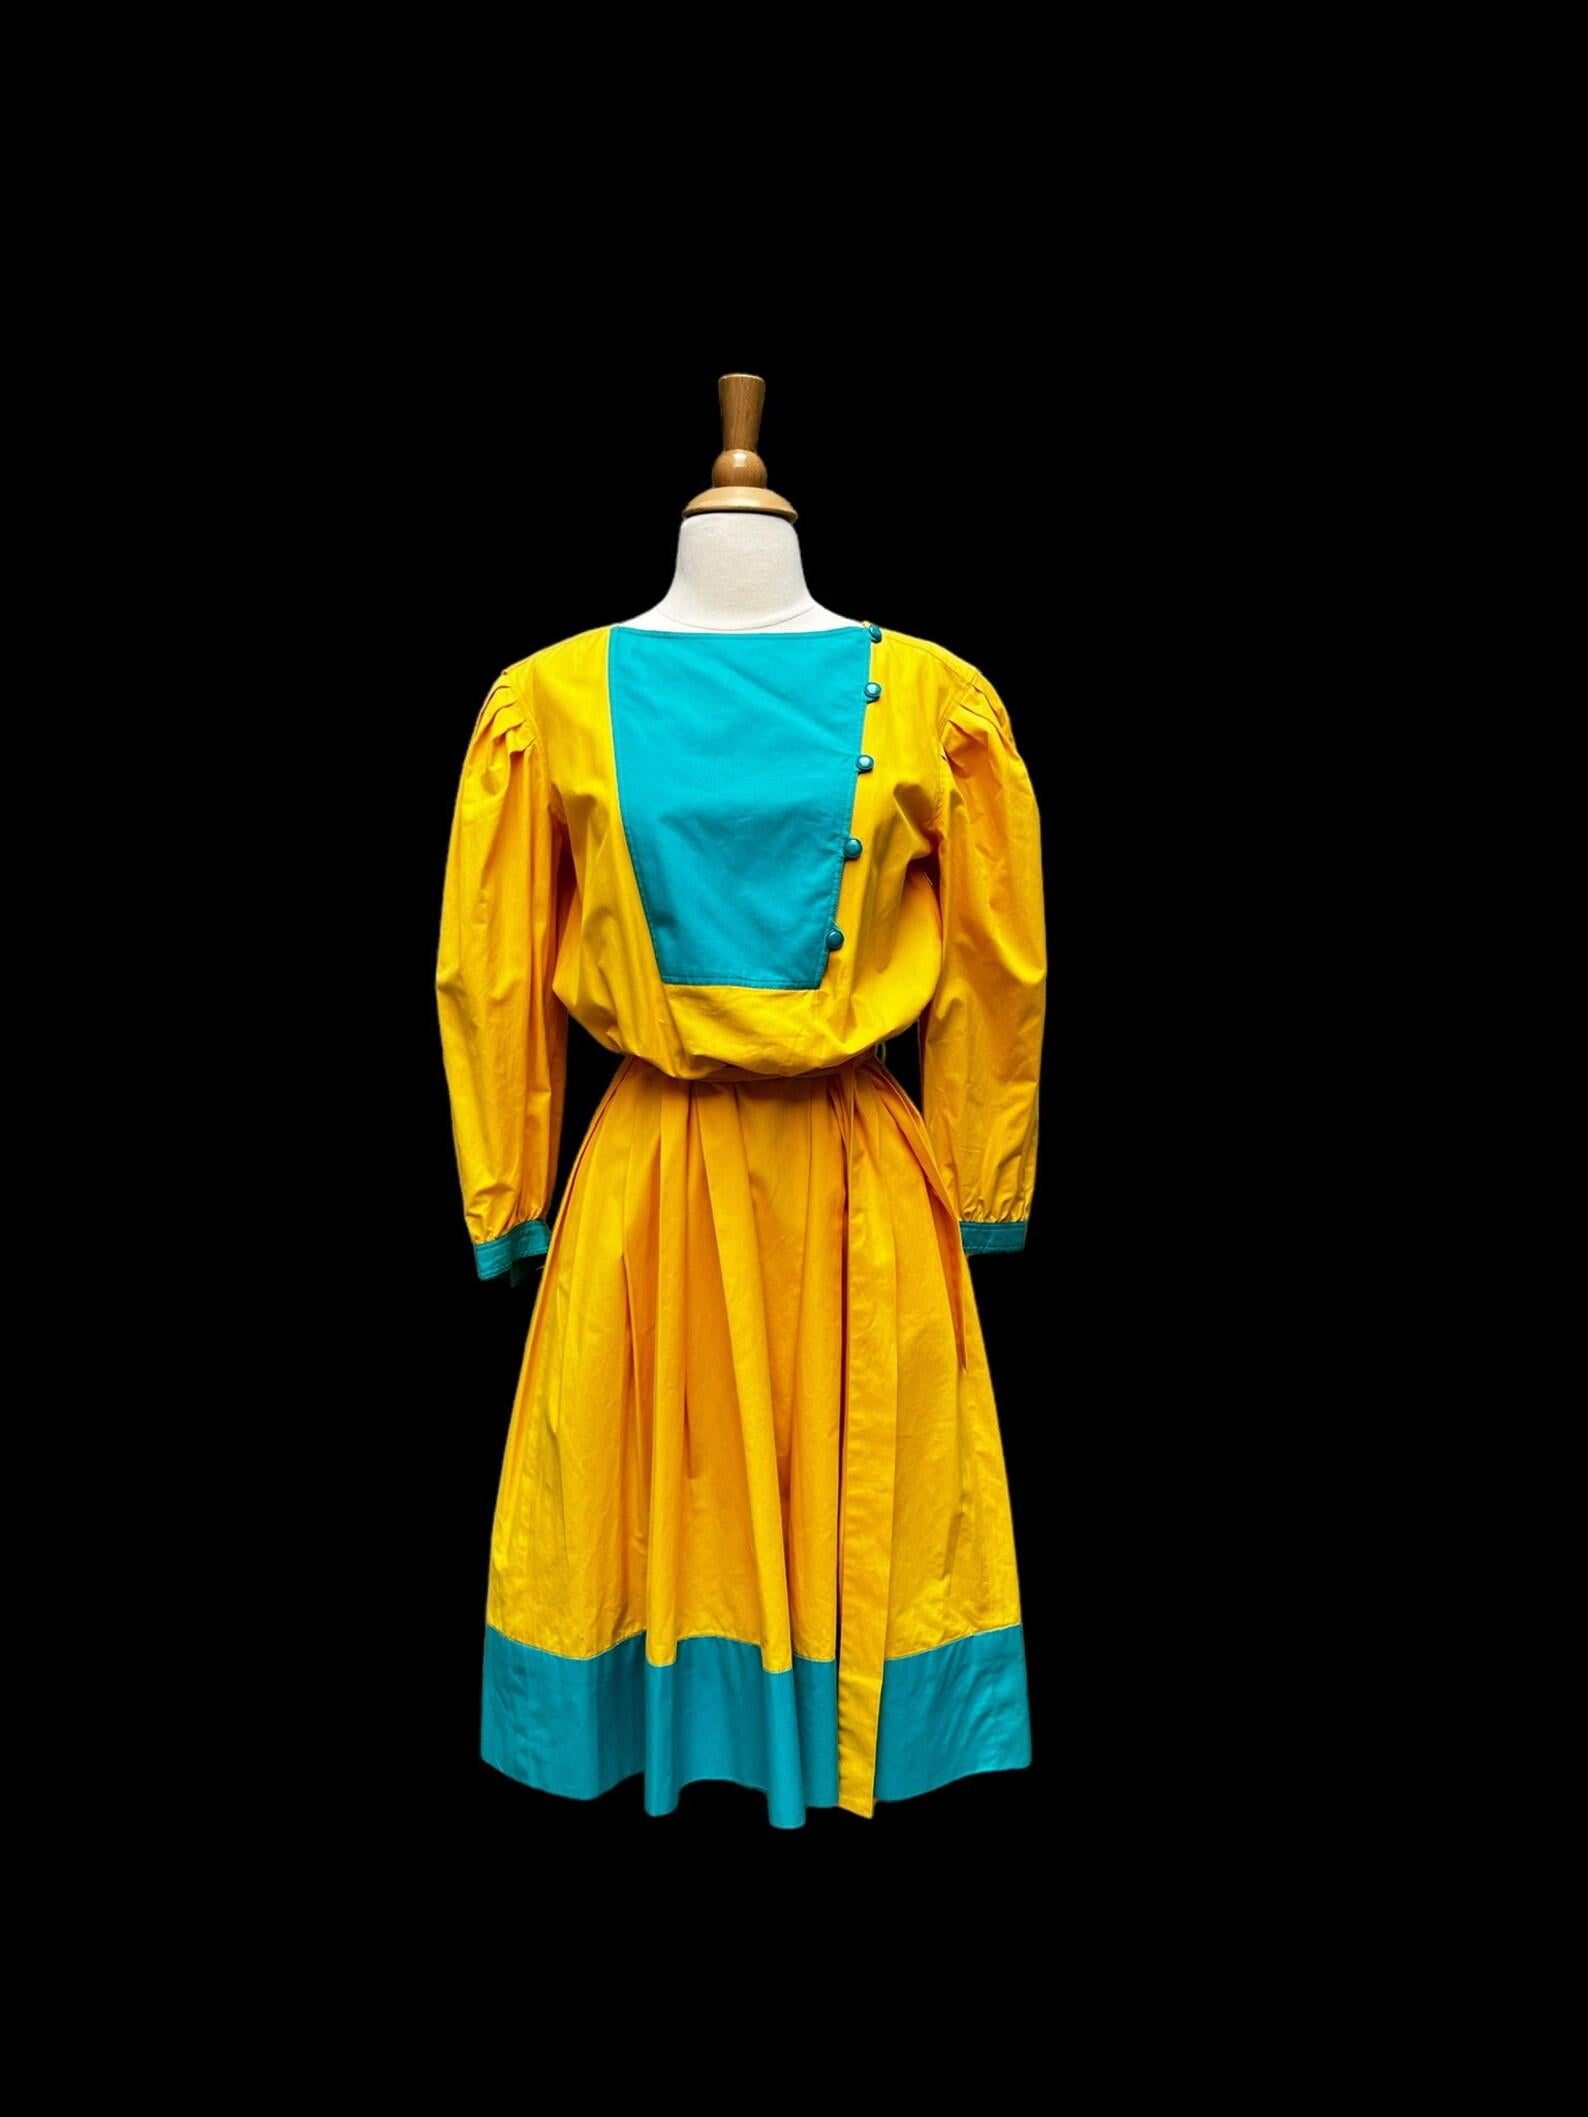 Emanuel Ungaro yellow & turquoise blue cotton dress. blouson bodice, fitted waist and full skirt with hip pockets. bracelet sleeves. 6 buttons at the side of the bodice, can be worn open or closed. dress has a side zip closure. self fabric belt and